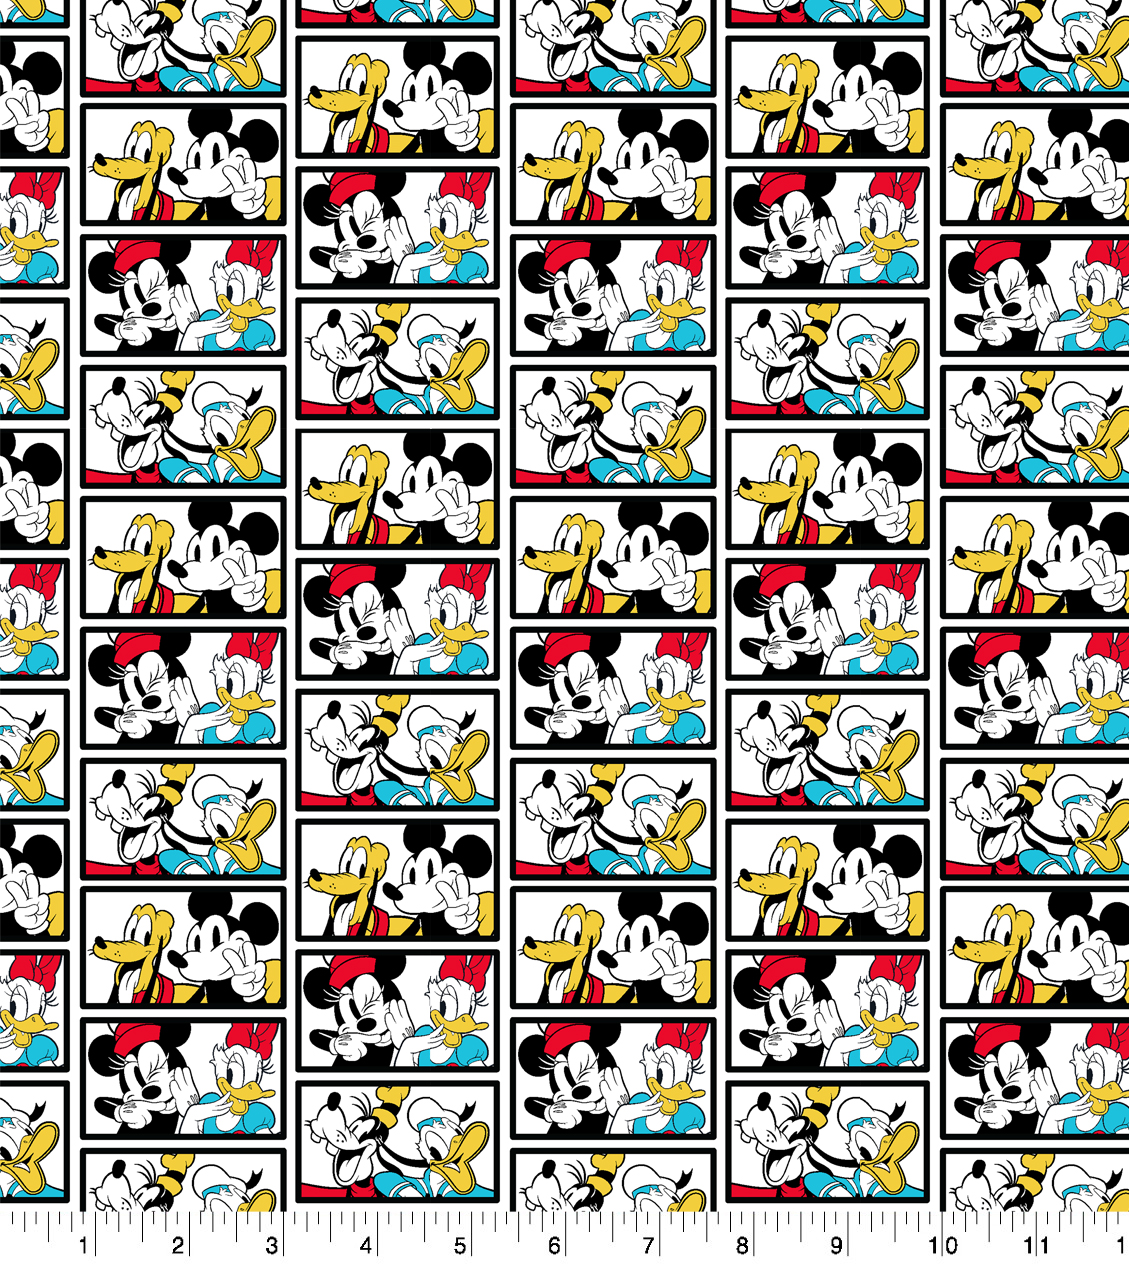 Springs Creative 18" x 21" Cotton Mickey and Friends Tile Precut Sewing & Craft Fabric, Multi-color - image 1 of 3